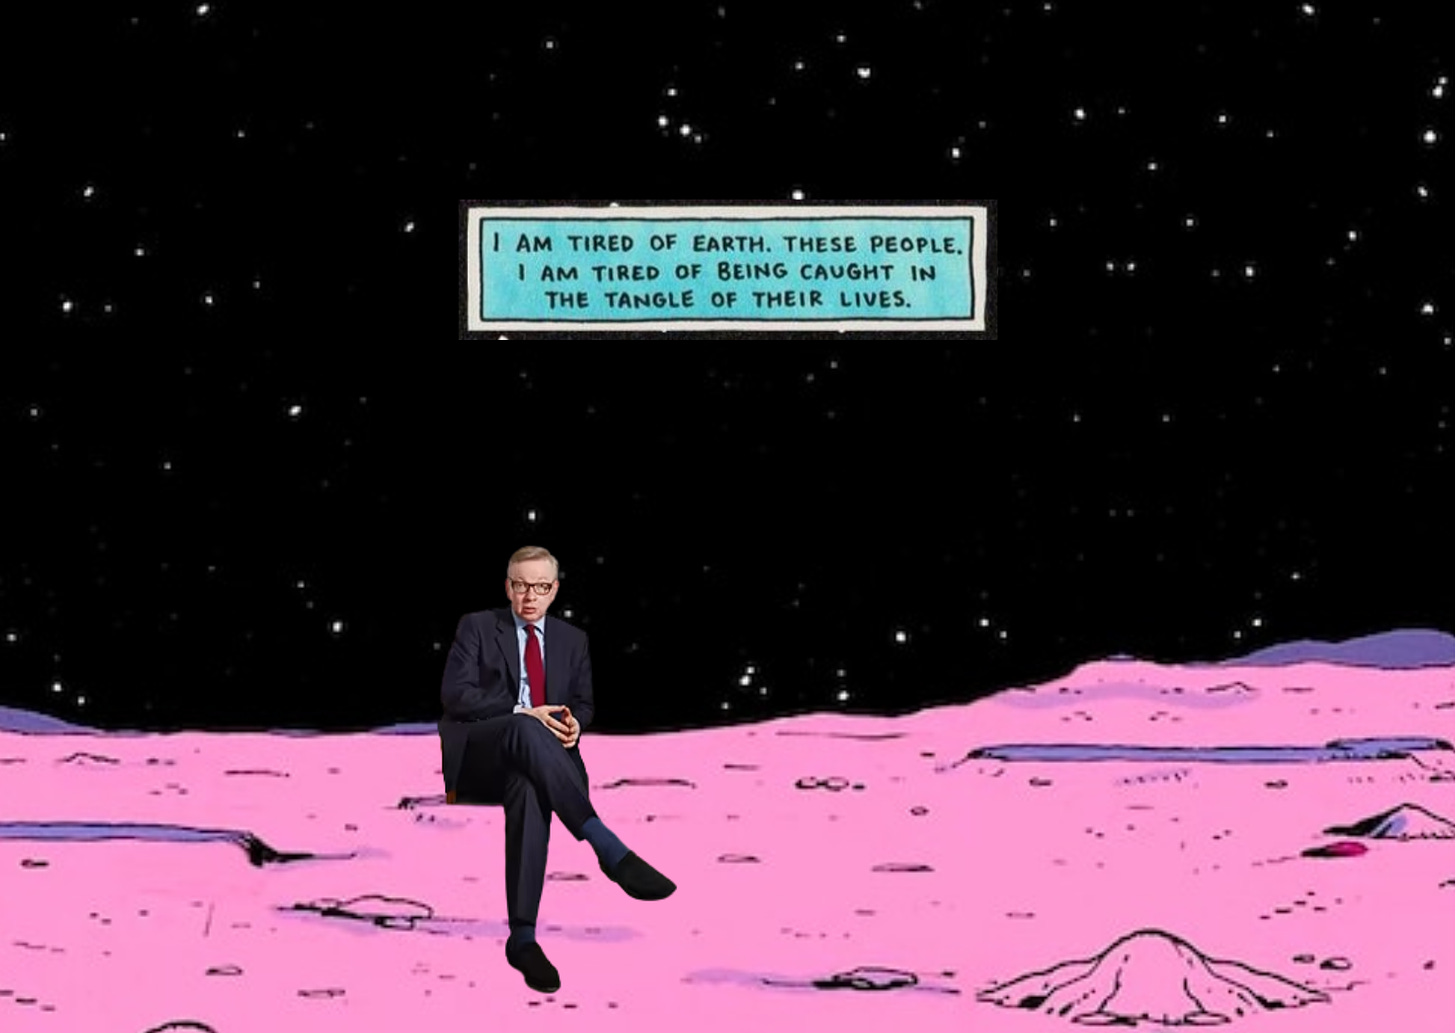 Michael Gove on Mars, above him the speech bubble reads: "I am tired of Earth, these people. I am tired of being caught in the tangle of their lives."